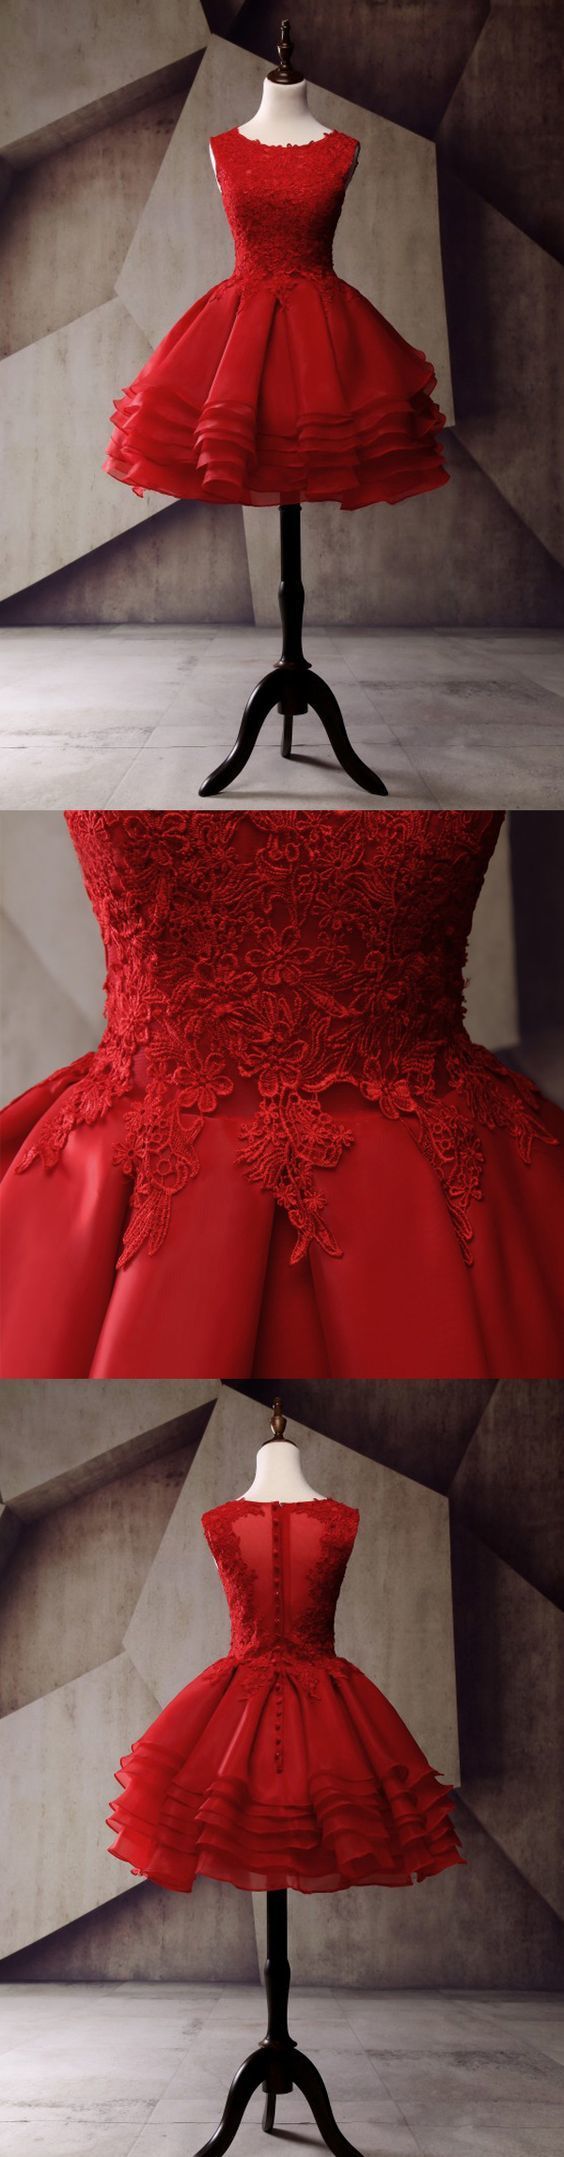 Sexy O-neck Lace Prom Dress Short, Skirts Tiers Short Homecoming Dress, A Line Women Gowns Short